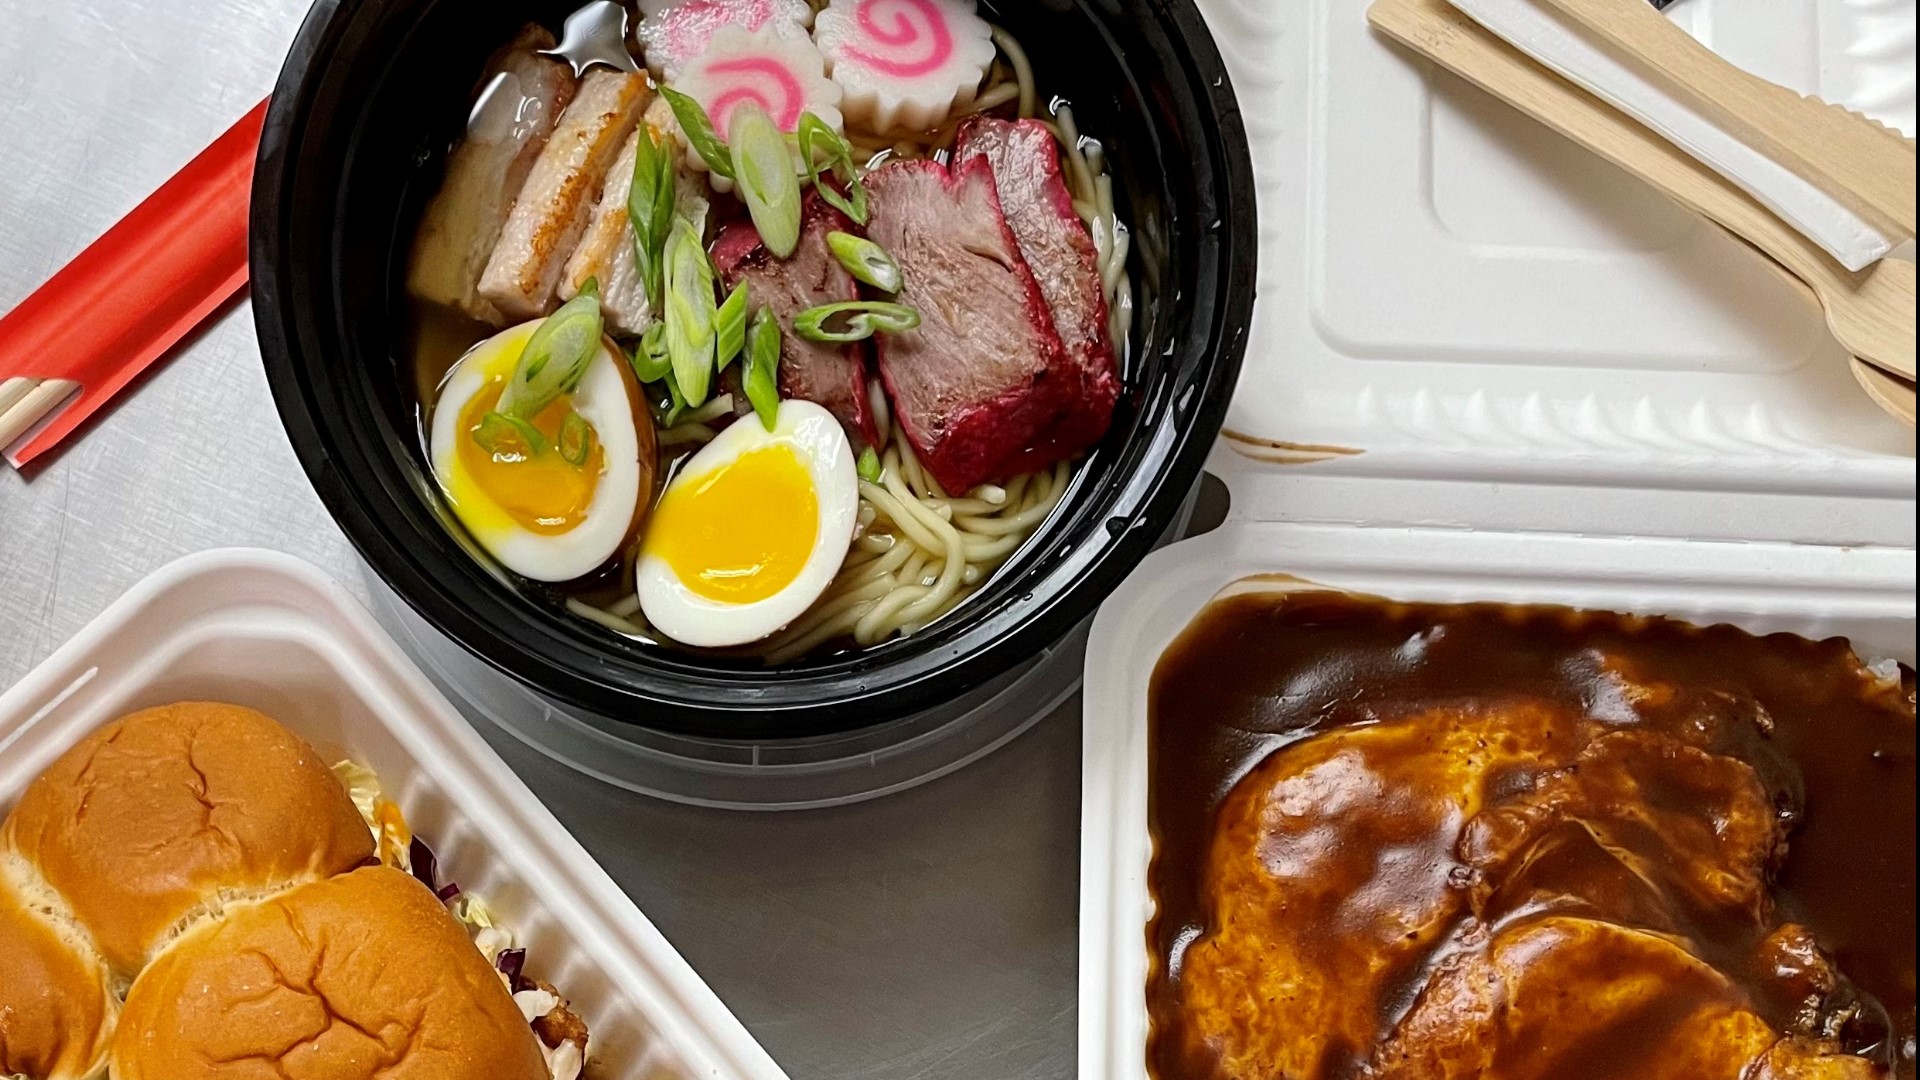 This gas station will fill you up with musubi, loco moco and saimin.